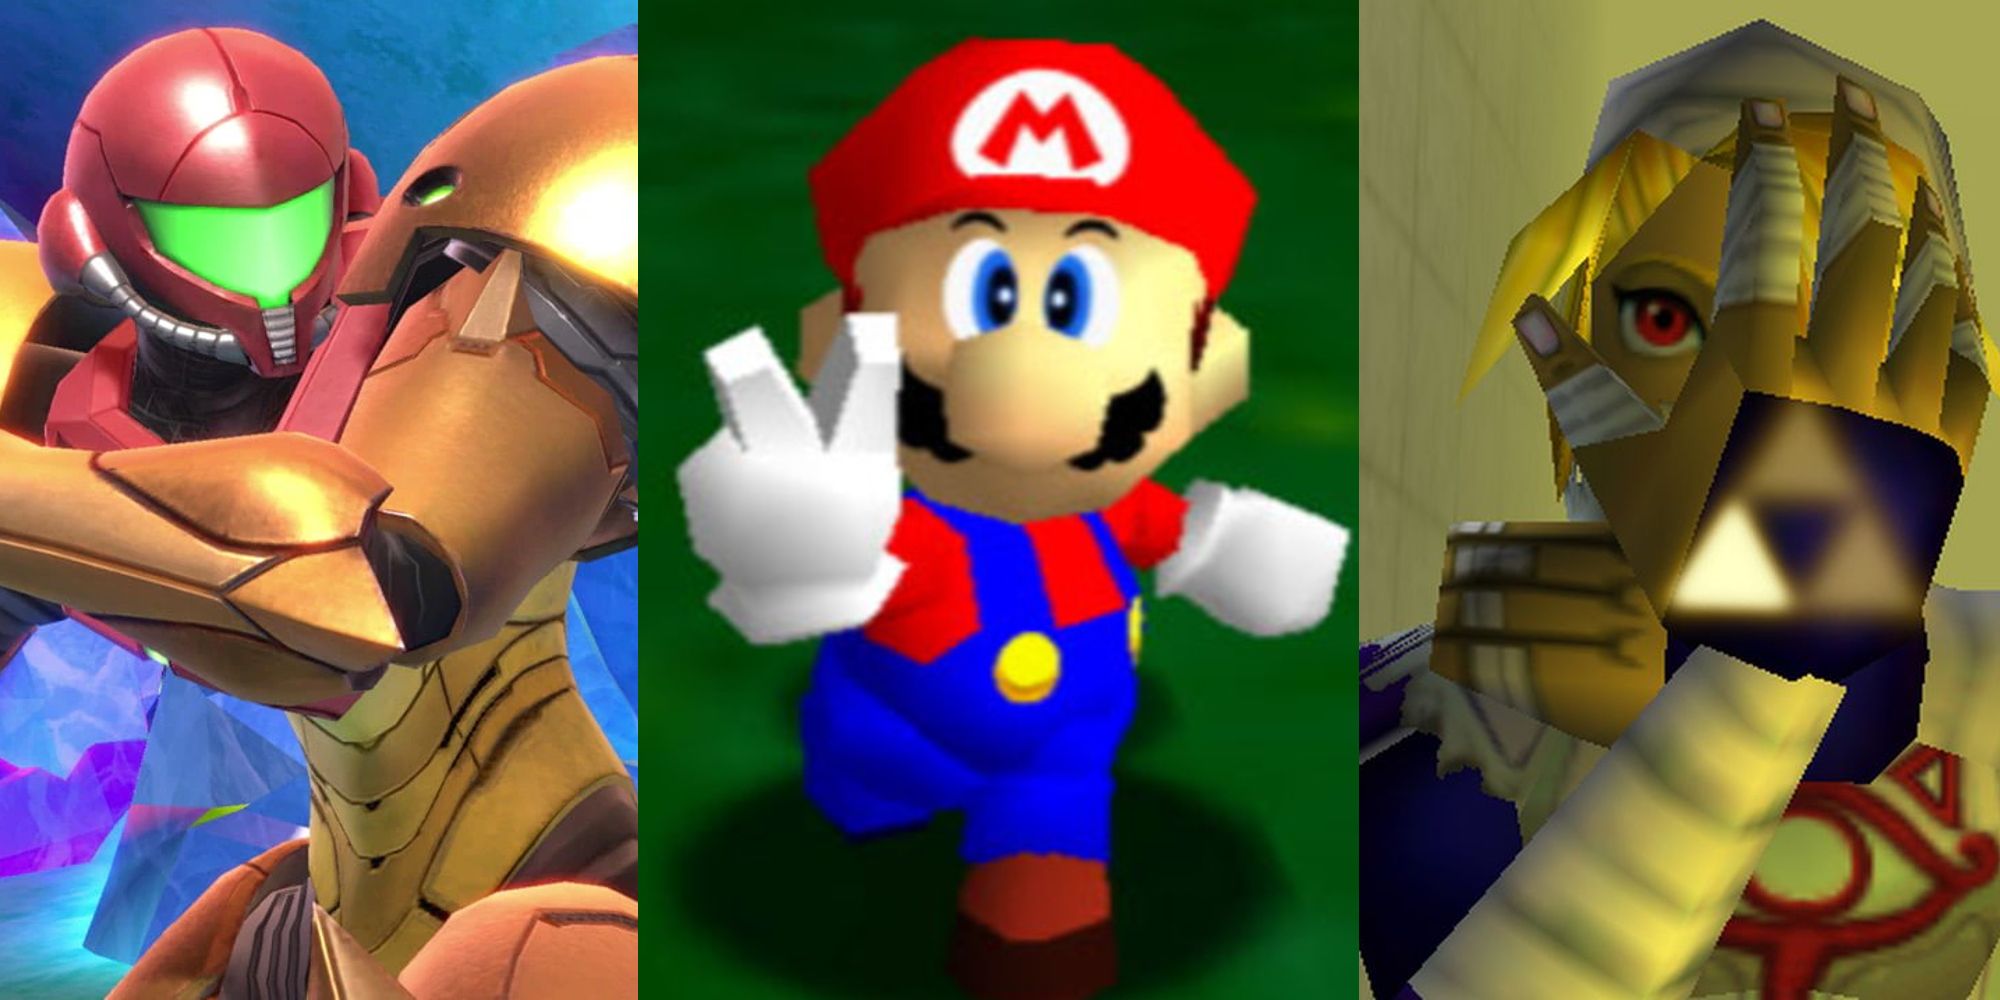 Samus appearing in Super Smash Bros Ultimate; Mario in a victory pose in Super Mario 64; Sheik posing in Ocarina of Time